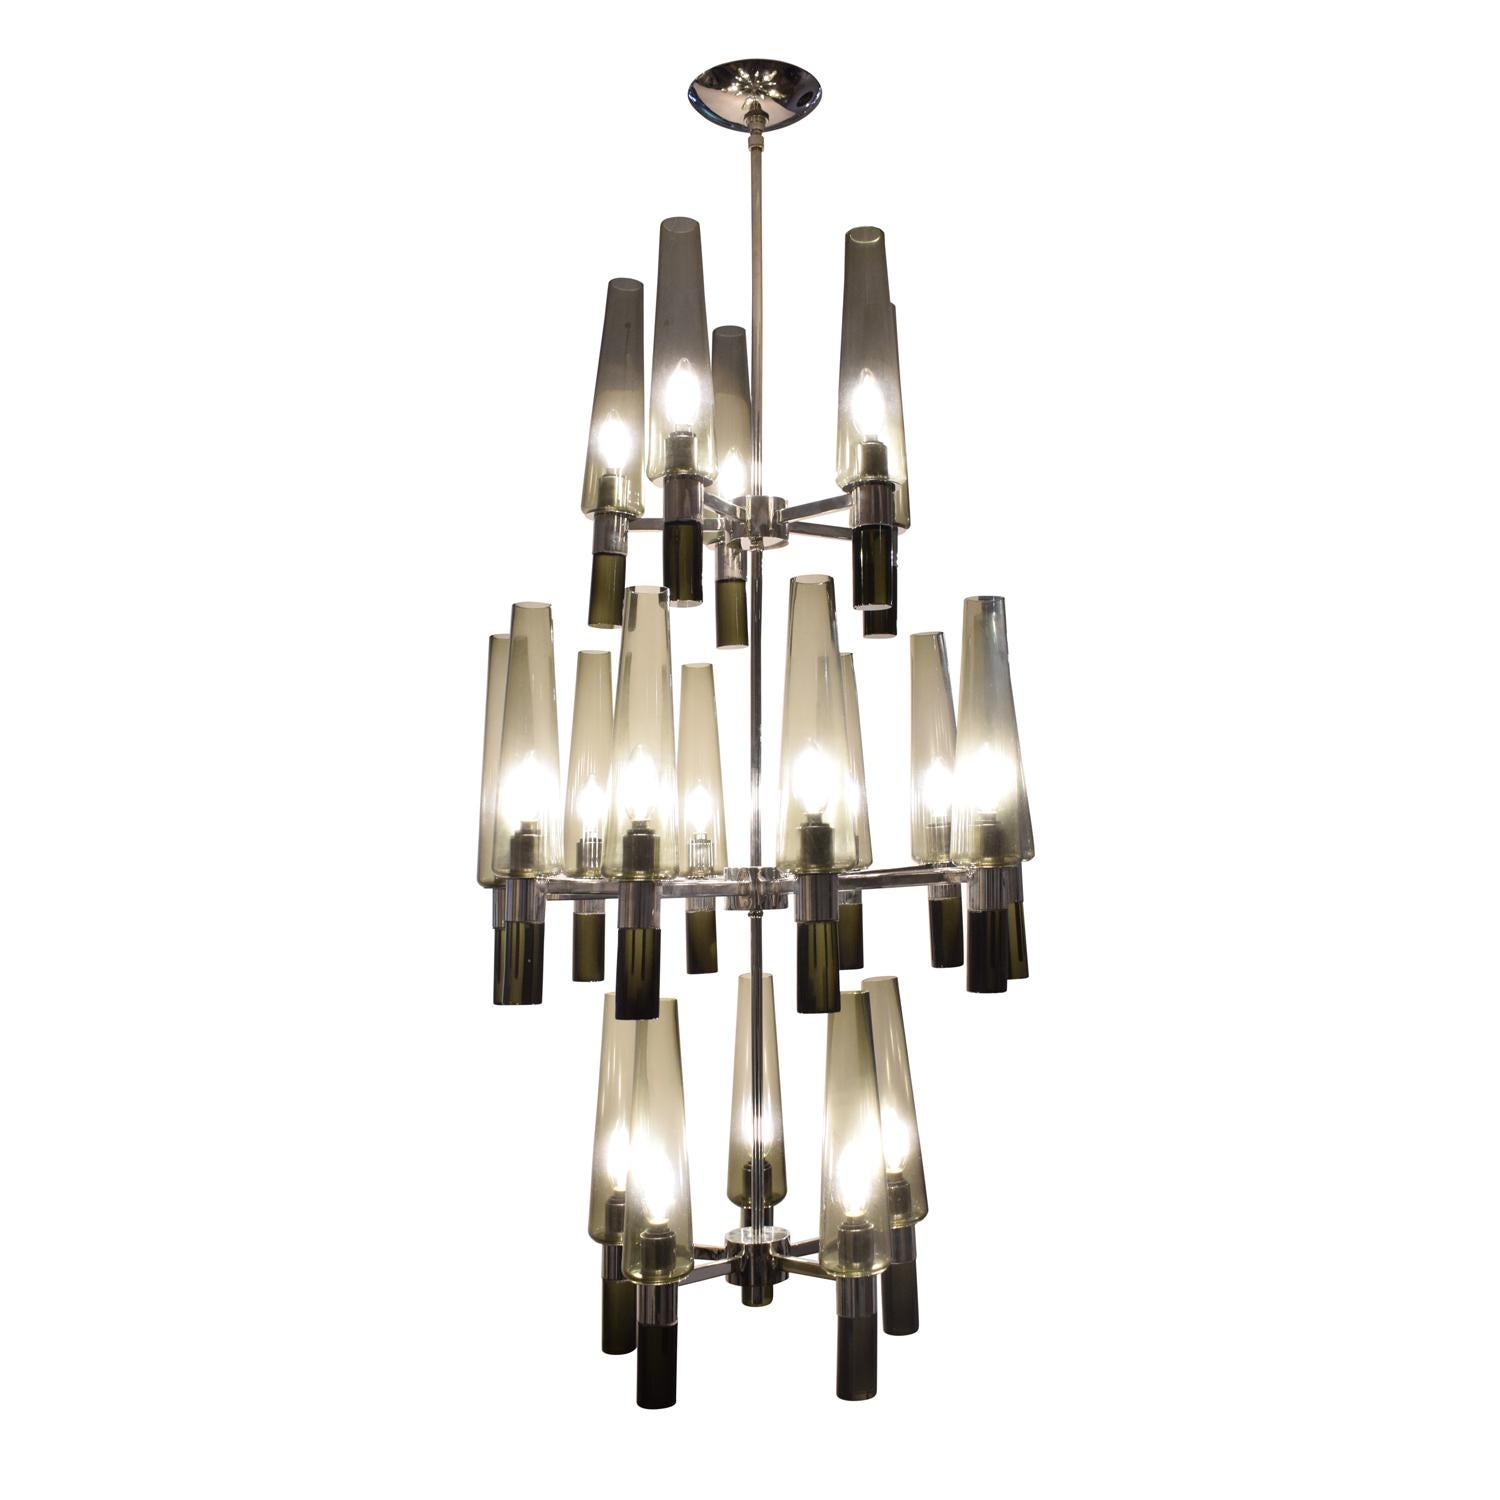 Large and exceptional chandelier in chrome with 3 tiers of smoked glass shades each one with a bulb inside by Seguso, Murano, Italy, 1990s. This chandelier is beautifully made.